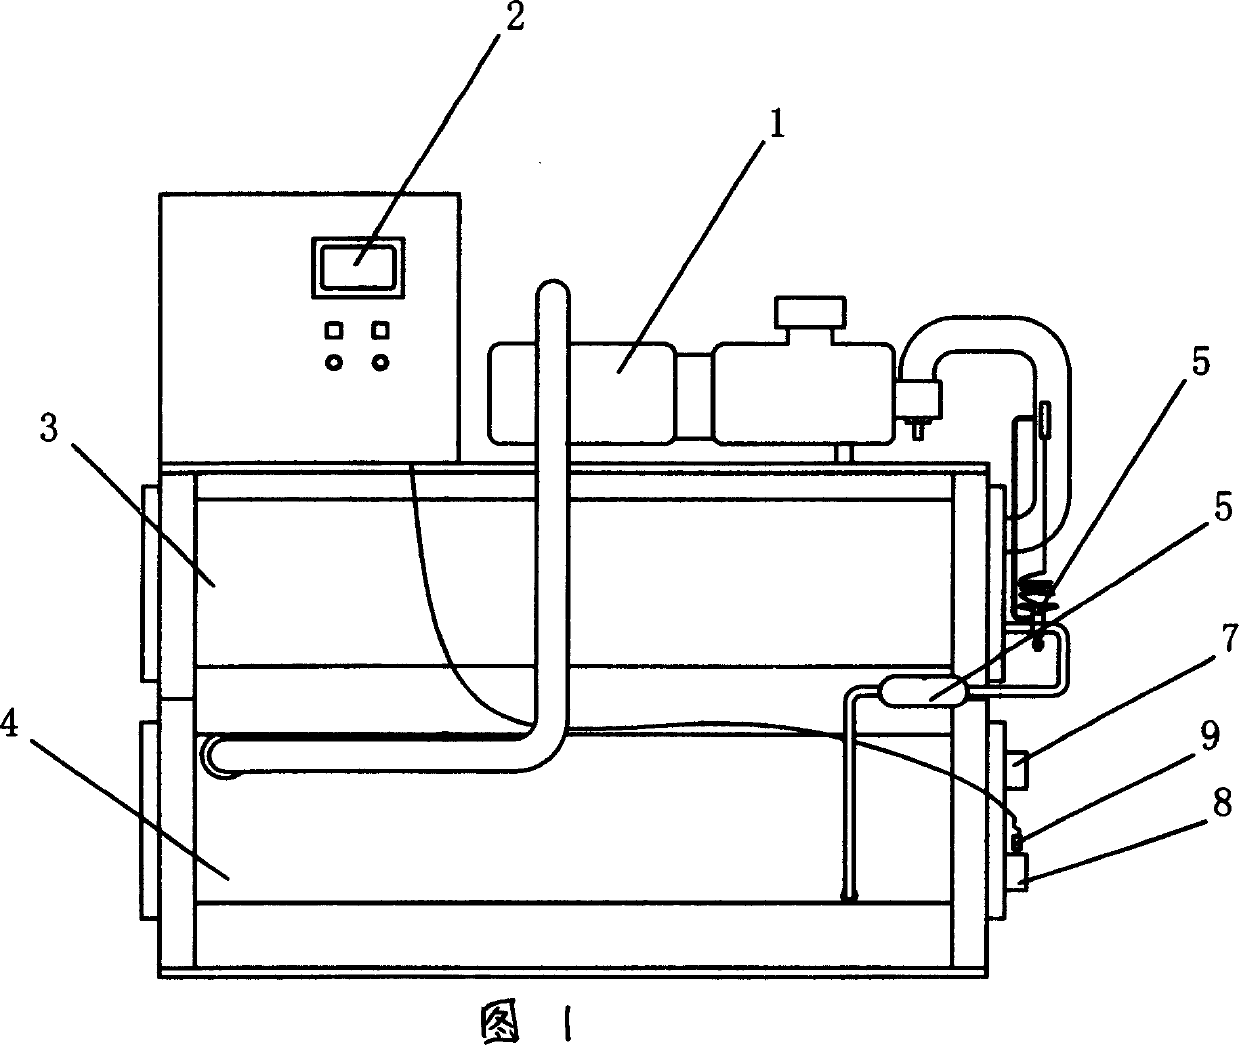 Adjusting method of cool-water screw precisioning air conditioner system